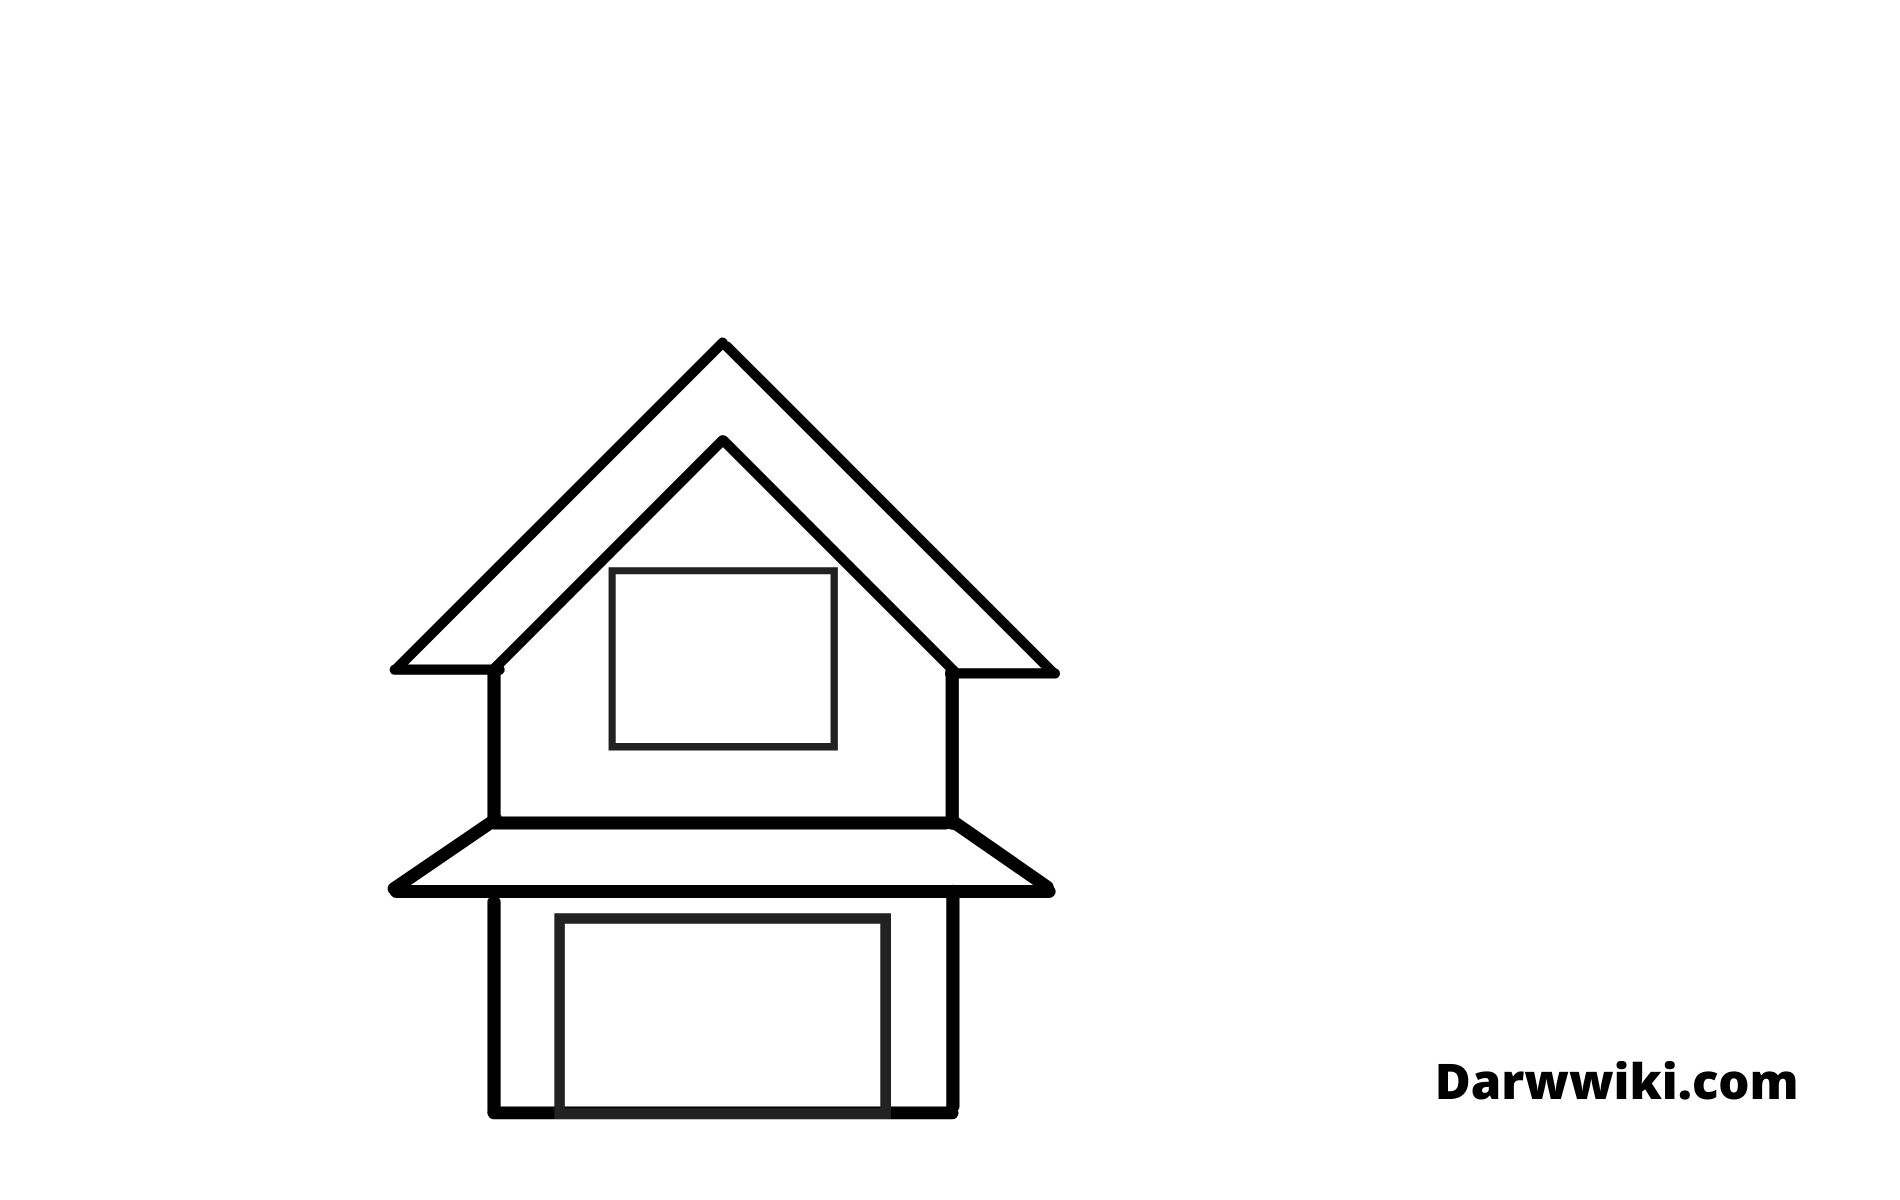 House drawing Step 3 - Draw First Part windows and Garage